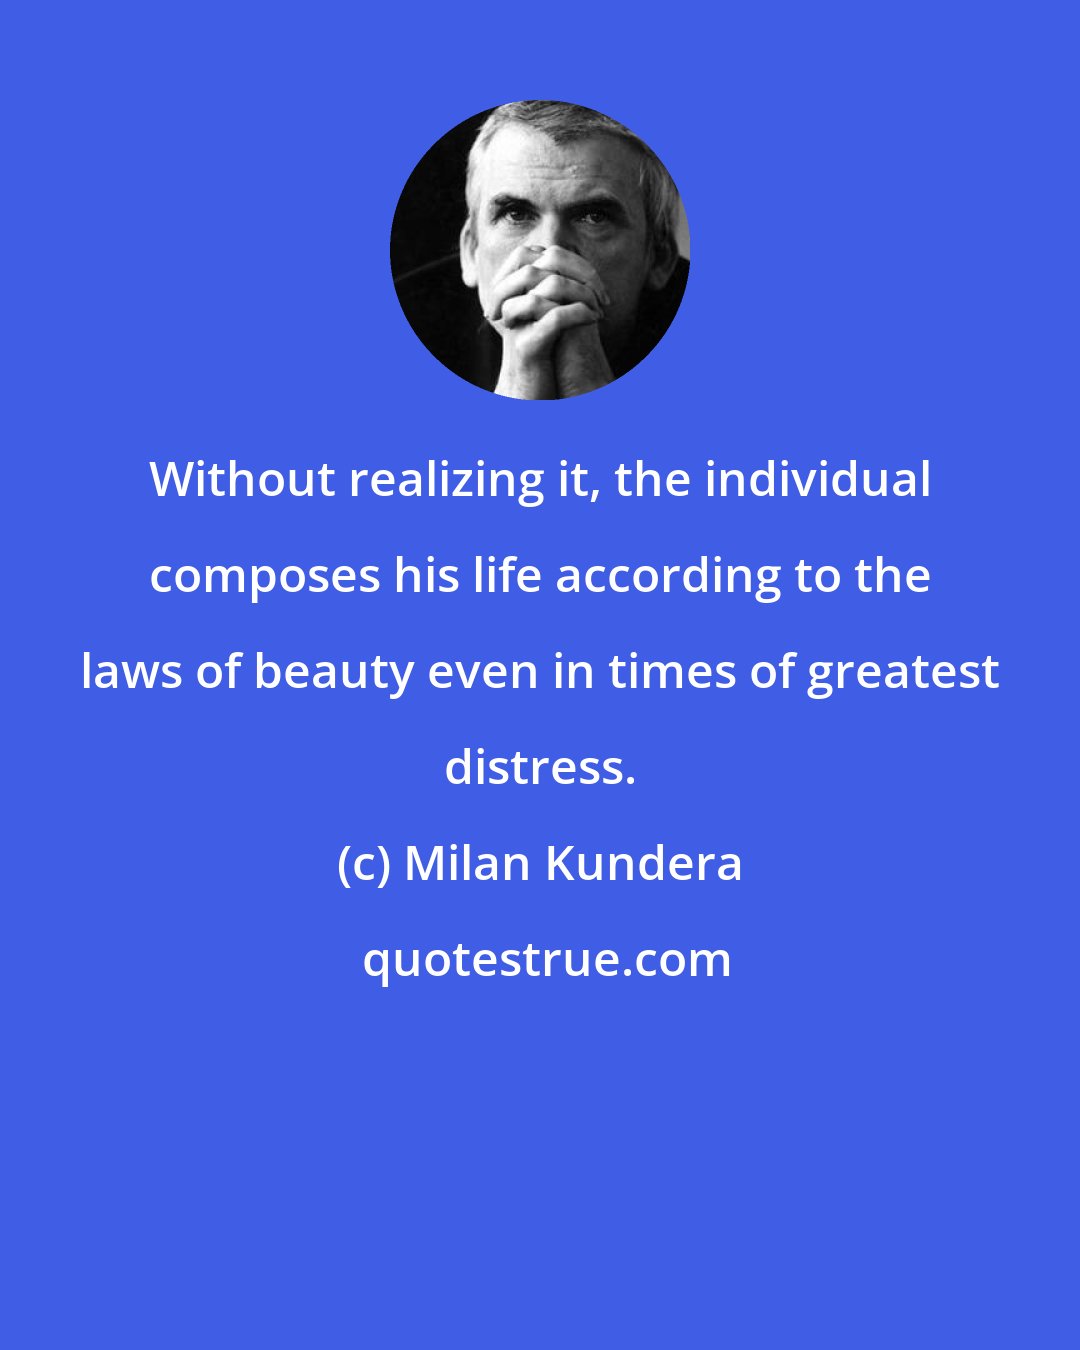 Milan Kundera: Without realizing it, the individual composes his life according to the laws of beauty even in times of greatest distress.